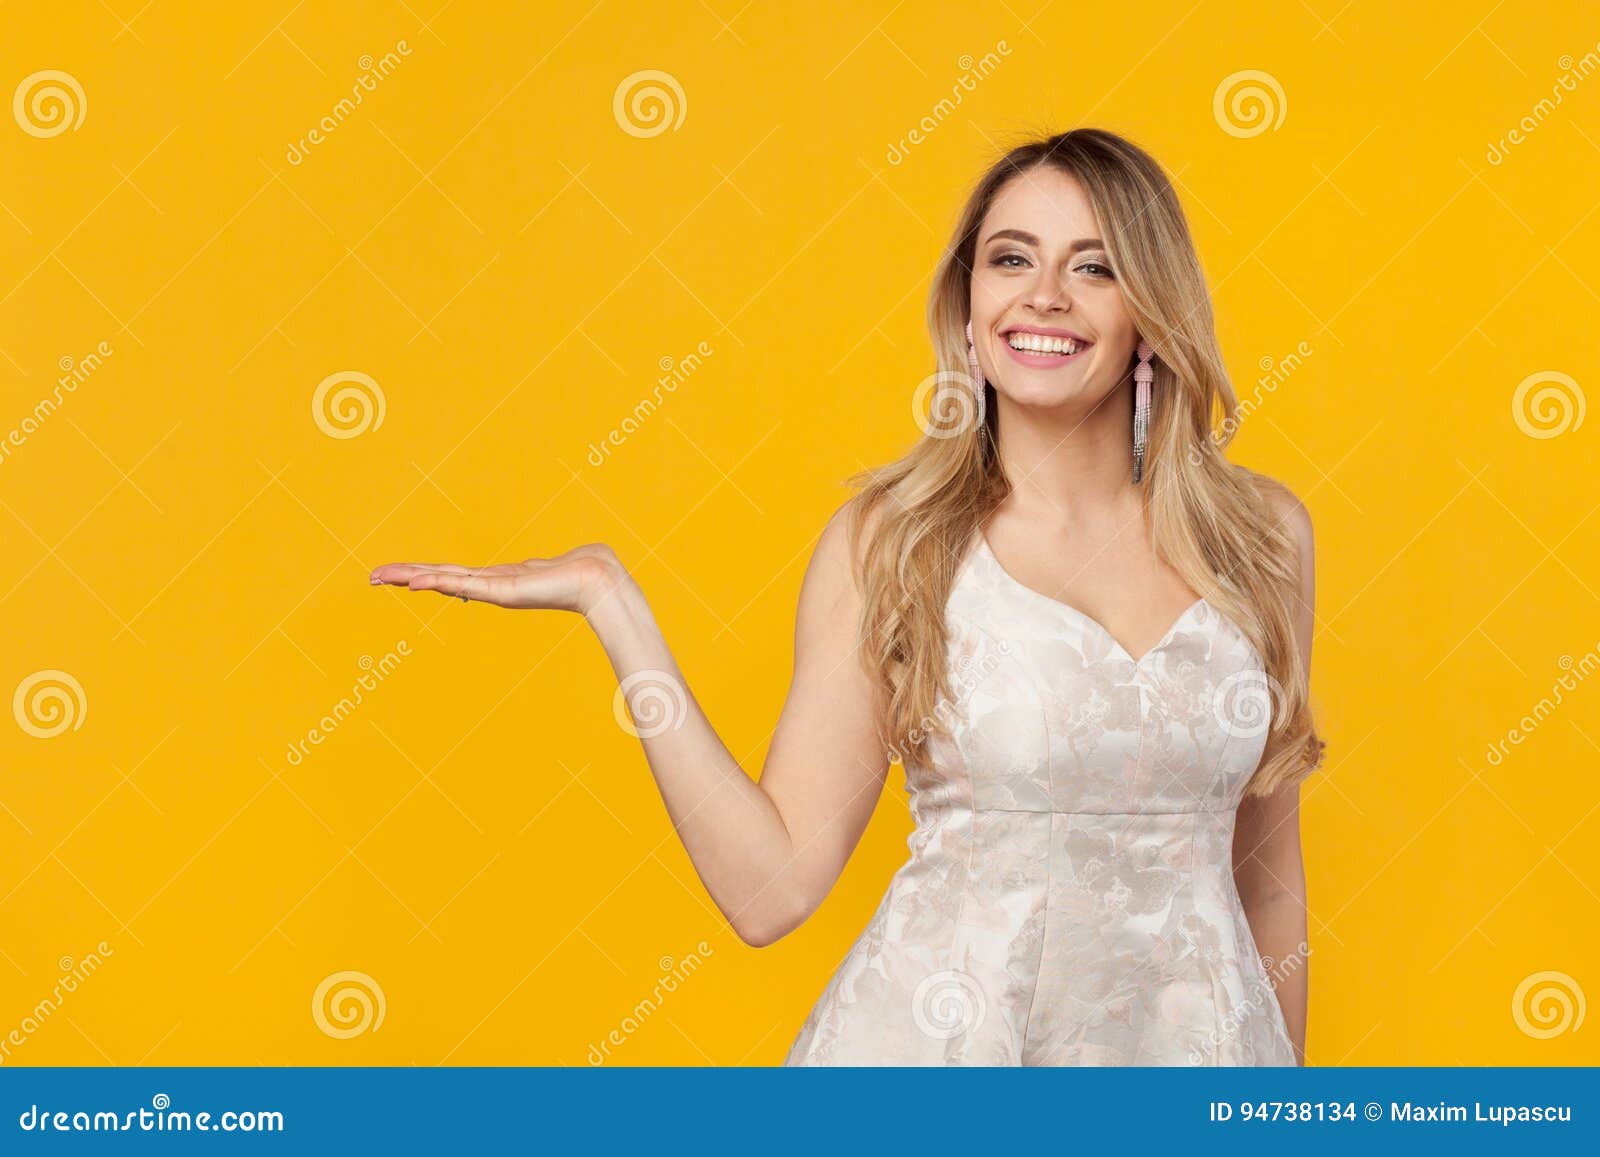 Model Posing And Holding One Hand Up Stock Photo Image Of Trendy Expression